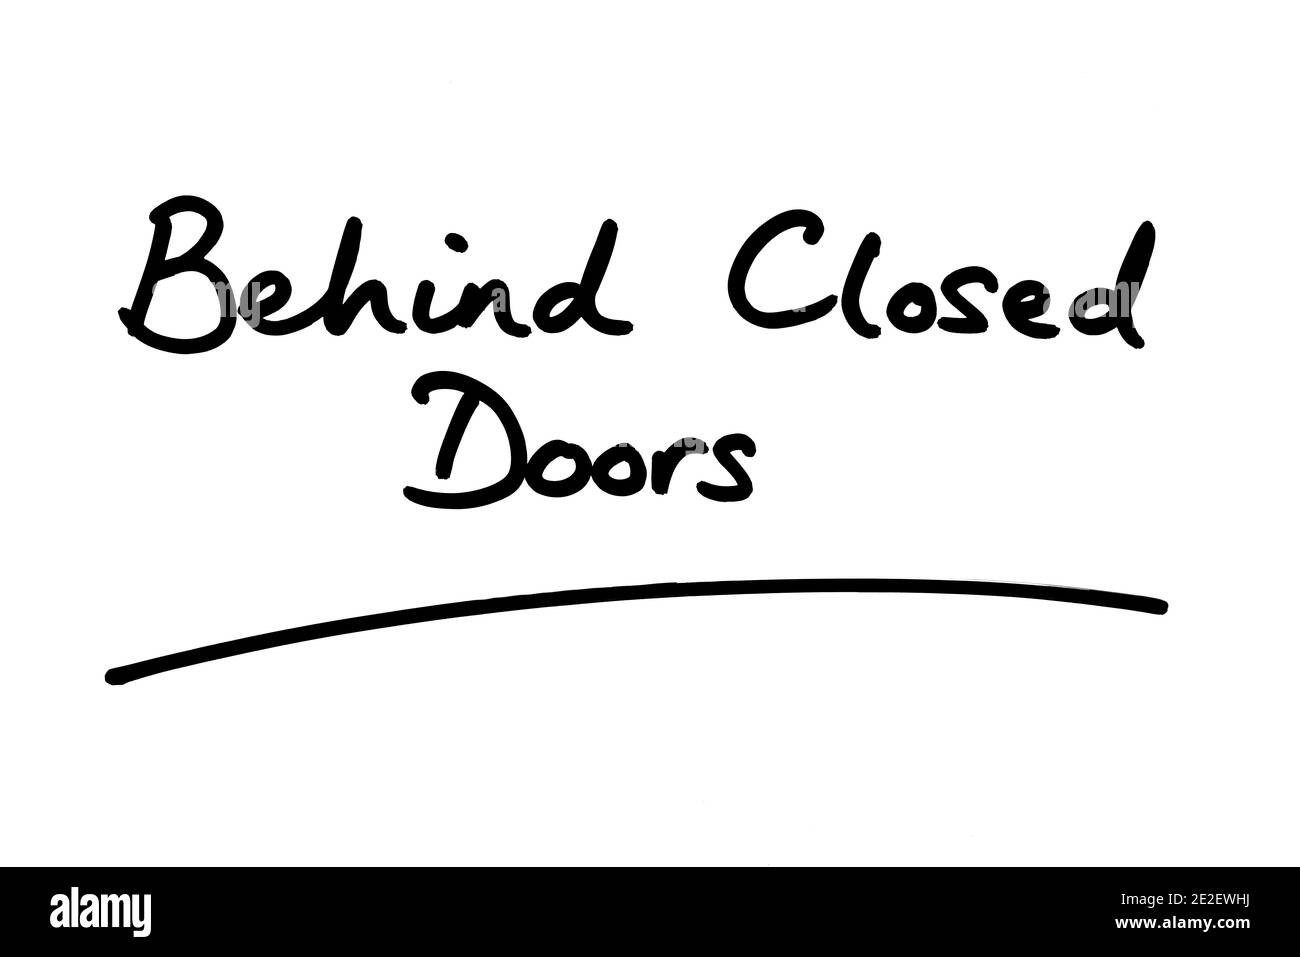 Behind Closed Doors handwritten on a white background. Stock Photo